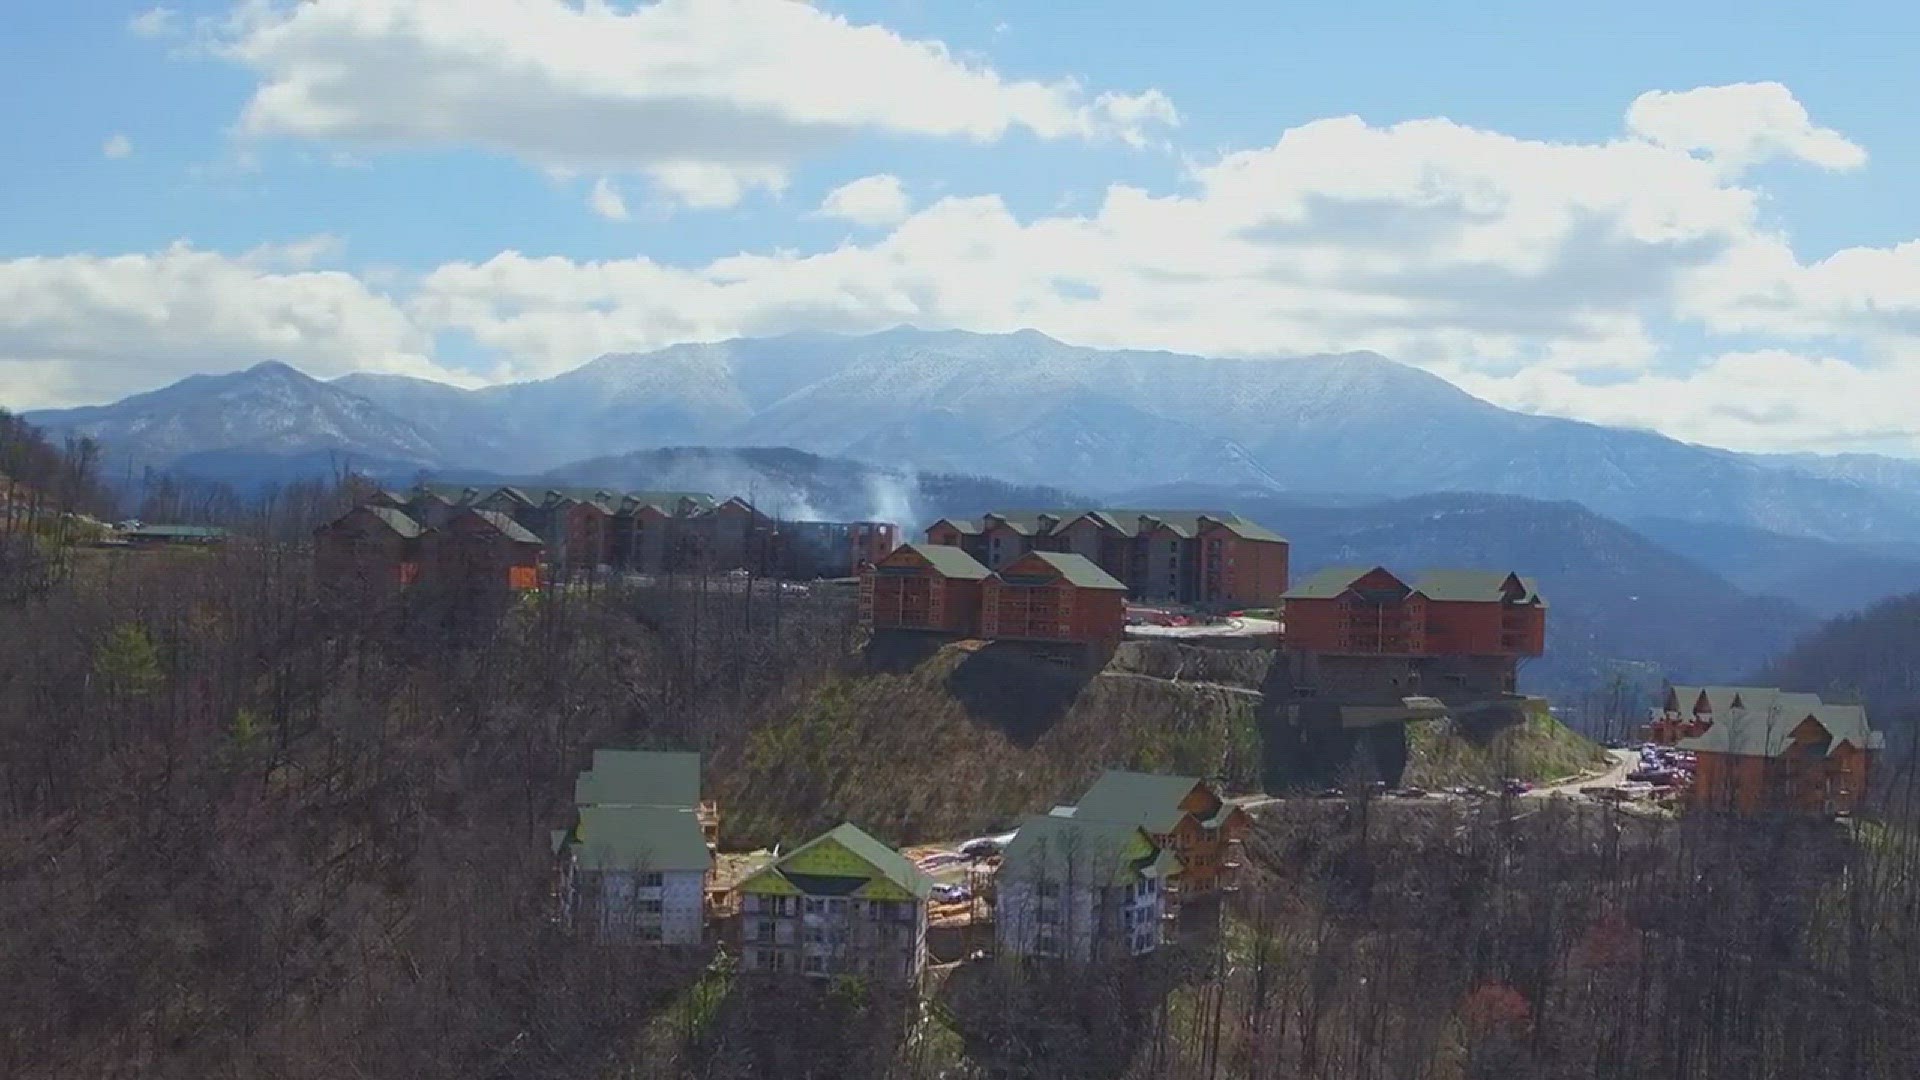 Most of the resort was destroyed during the 2016 Gatlinburg wildfires, but they are rebuilding. Now, another fire has destroyed one of the buildings under construction